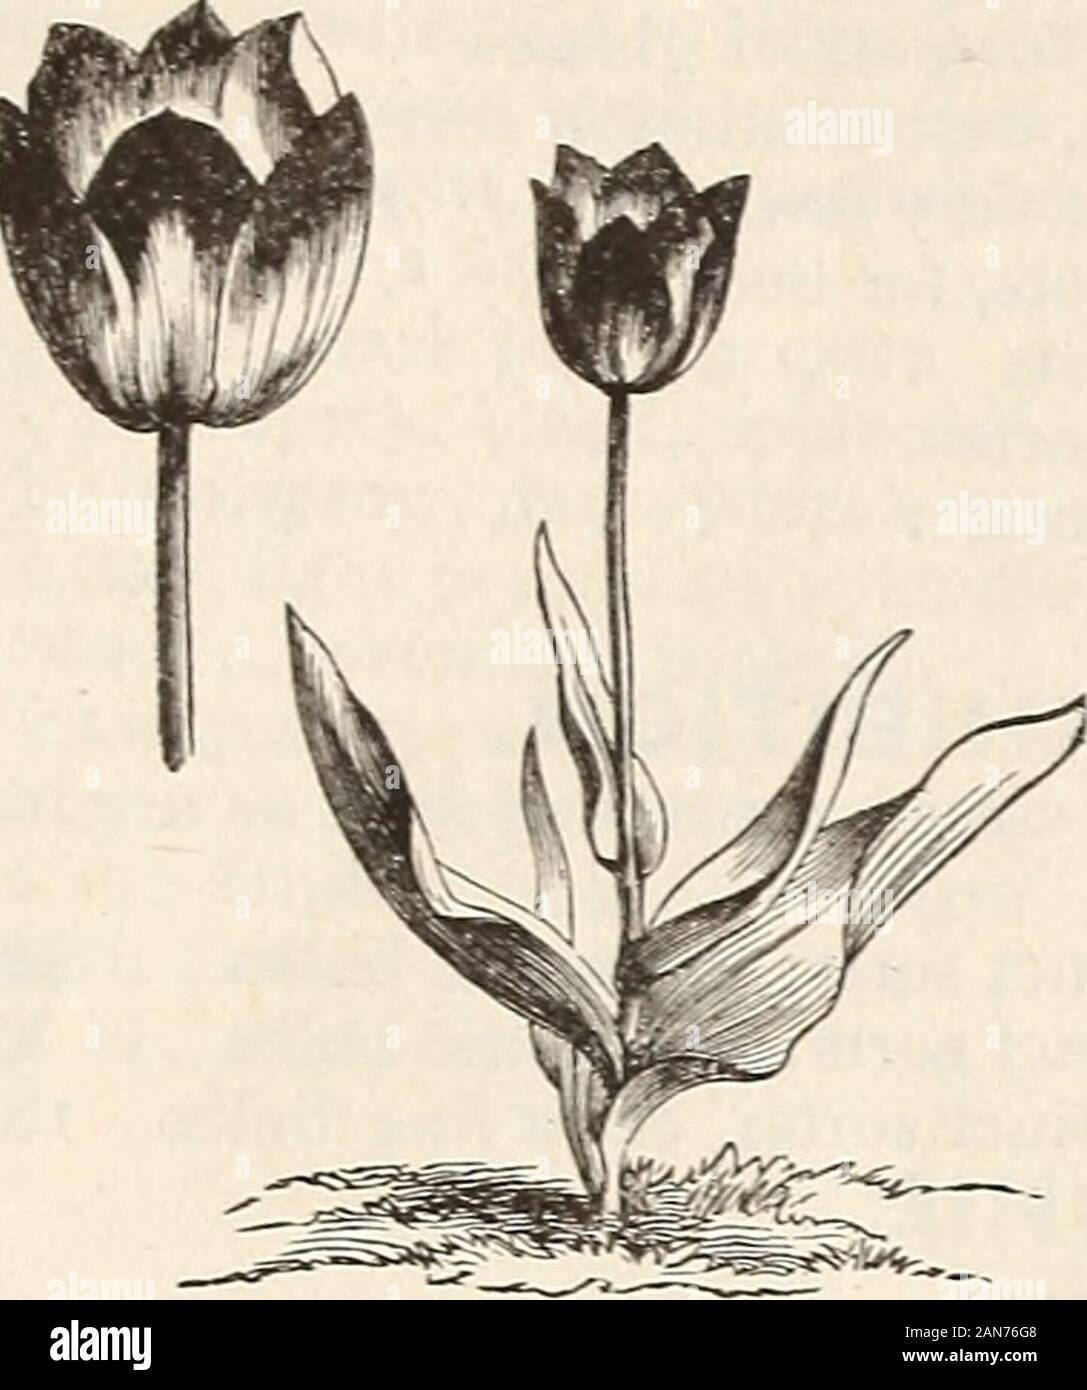 Autumn catalogue 1894 : bulbs . rant spikes are valuable for cutting purposes. Each. Per Doz. Per ioo. Pure White $0.05 $0.45 $3.00 Pale Yellow 08 .70 5.00 GRAPE HYACINTHS. Perfectly hardy, very pretty, and admirably adapted for permanent beds, clumps, edges, andpartially shaded situations. Height, about 5 inches. Each. Per Doz. Per ioo. Blue Grape Hyacinths $0.02 #0.10 $0.75 White^ 03 .20 1.50 MUSK AND FEATHERED HYACINTHS. Hardy, showy, early-flowering plants, with beautiful spikes of bell-shaped flowers. Each. Per Doz. Musk Hyacinth, yellow and blue; fragrant #0.10 $1.25 Feathered Hyacinth, Stock Photo